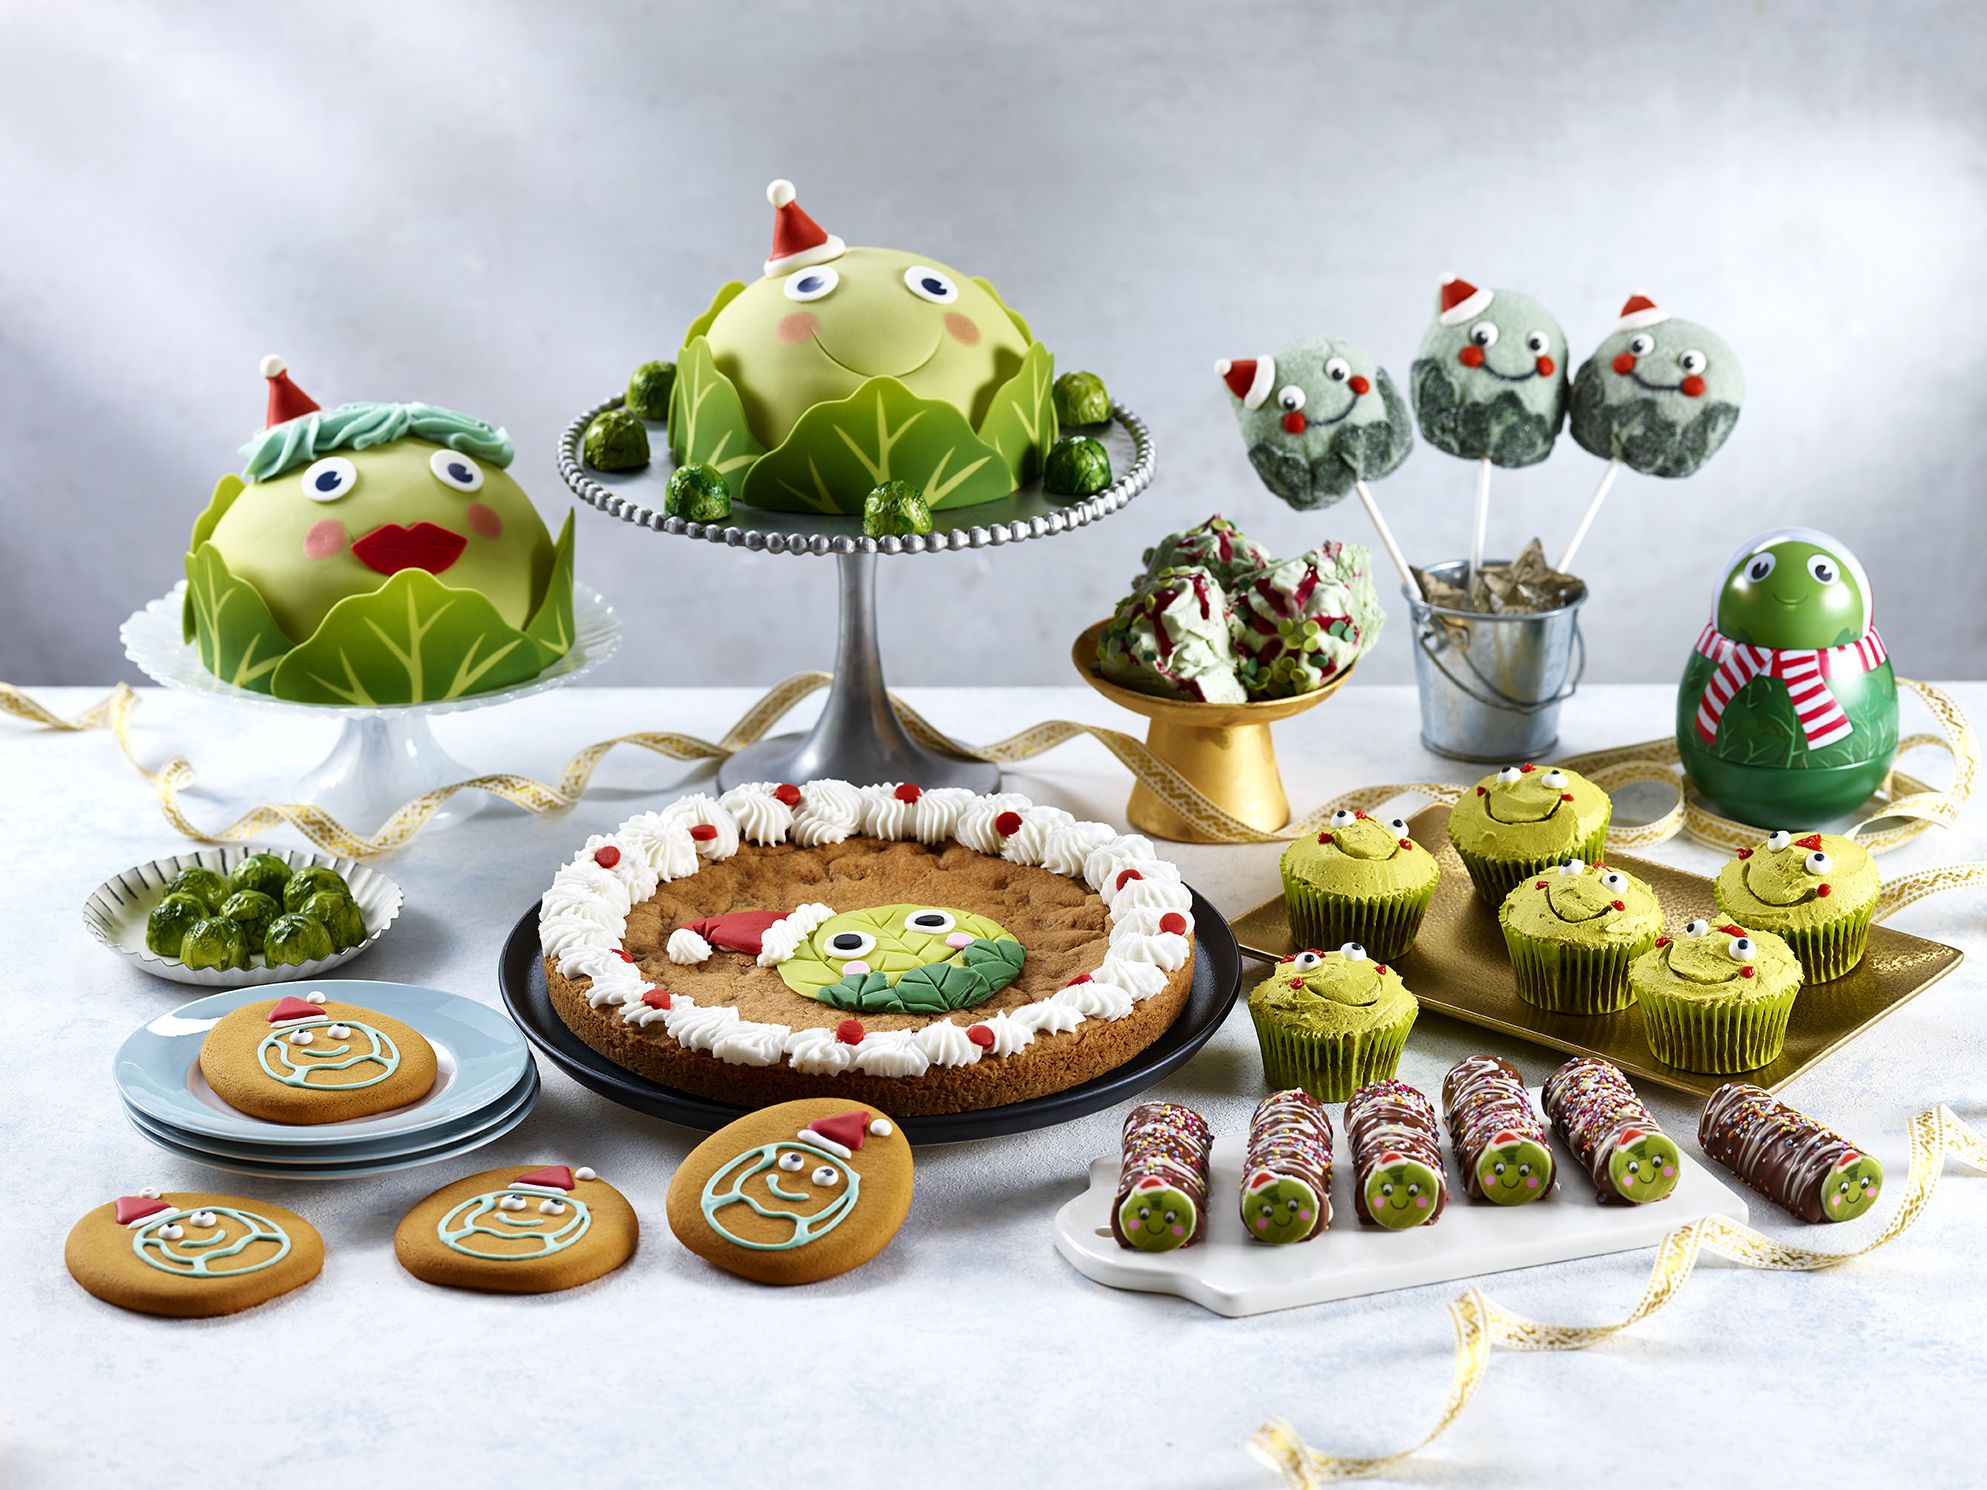 A Christmas treat: Sprout cake